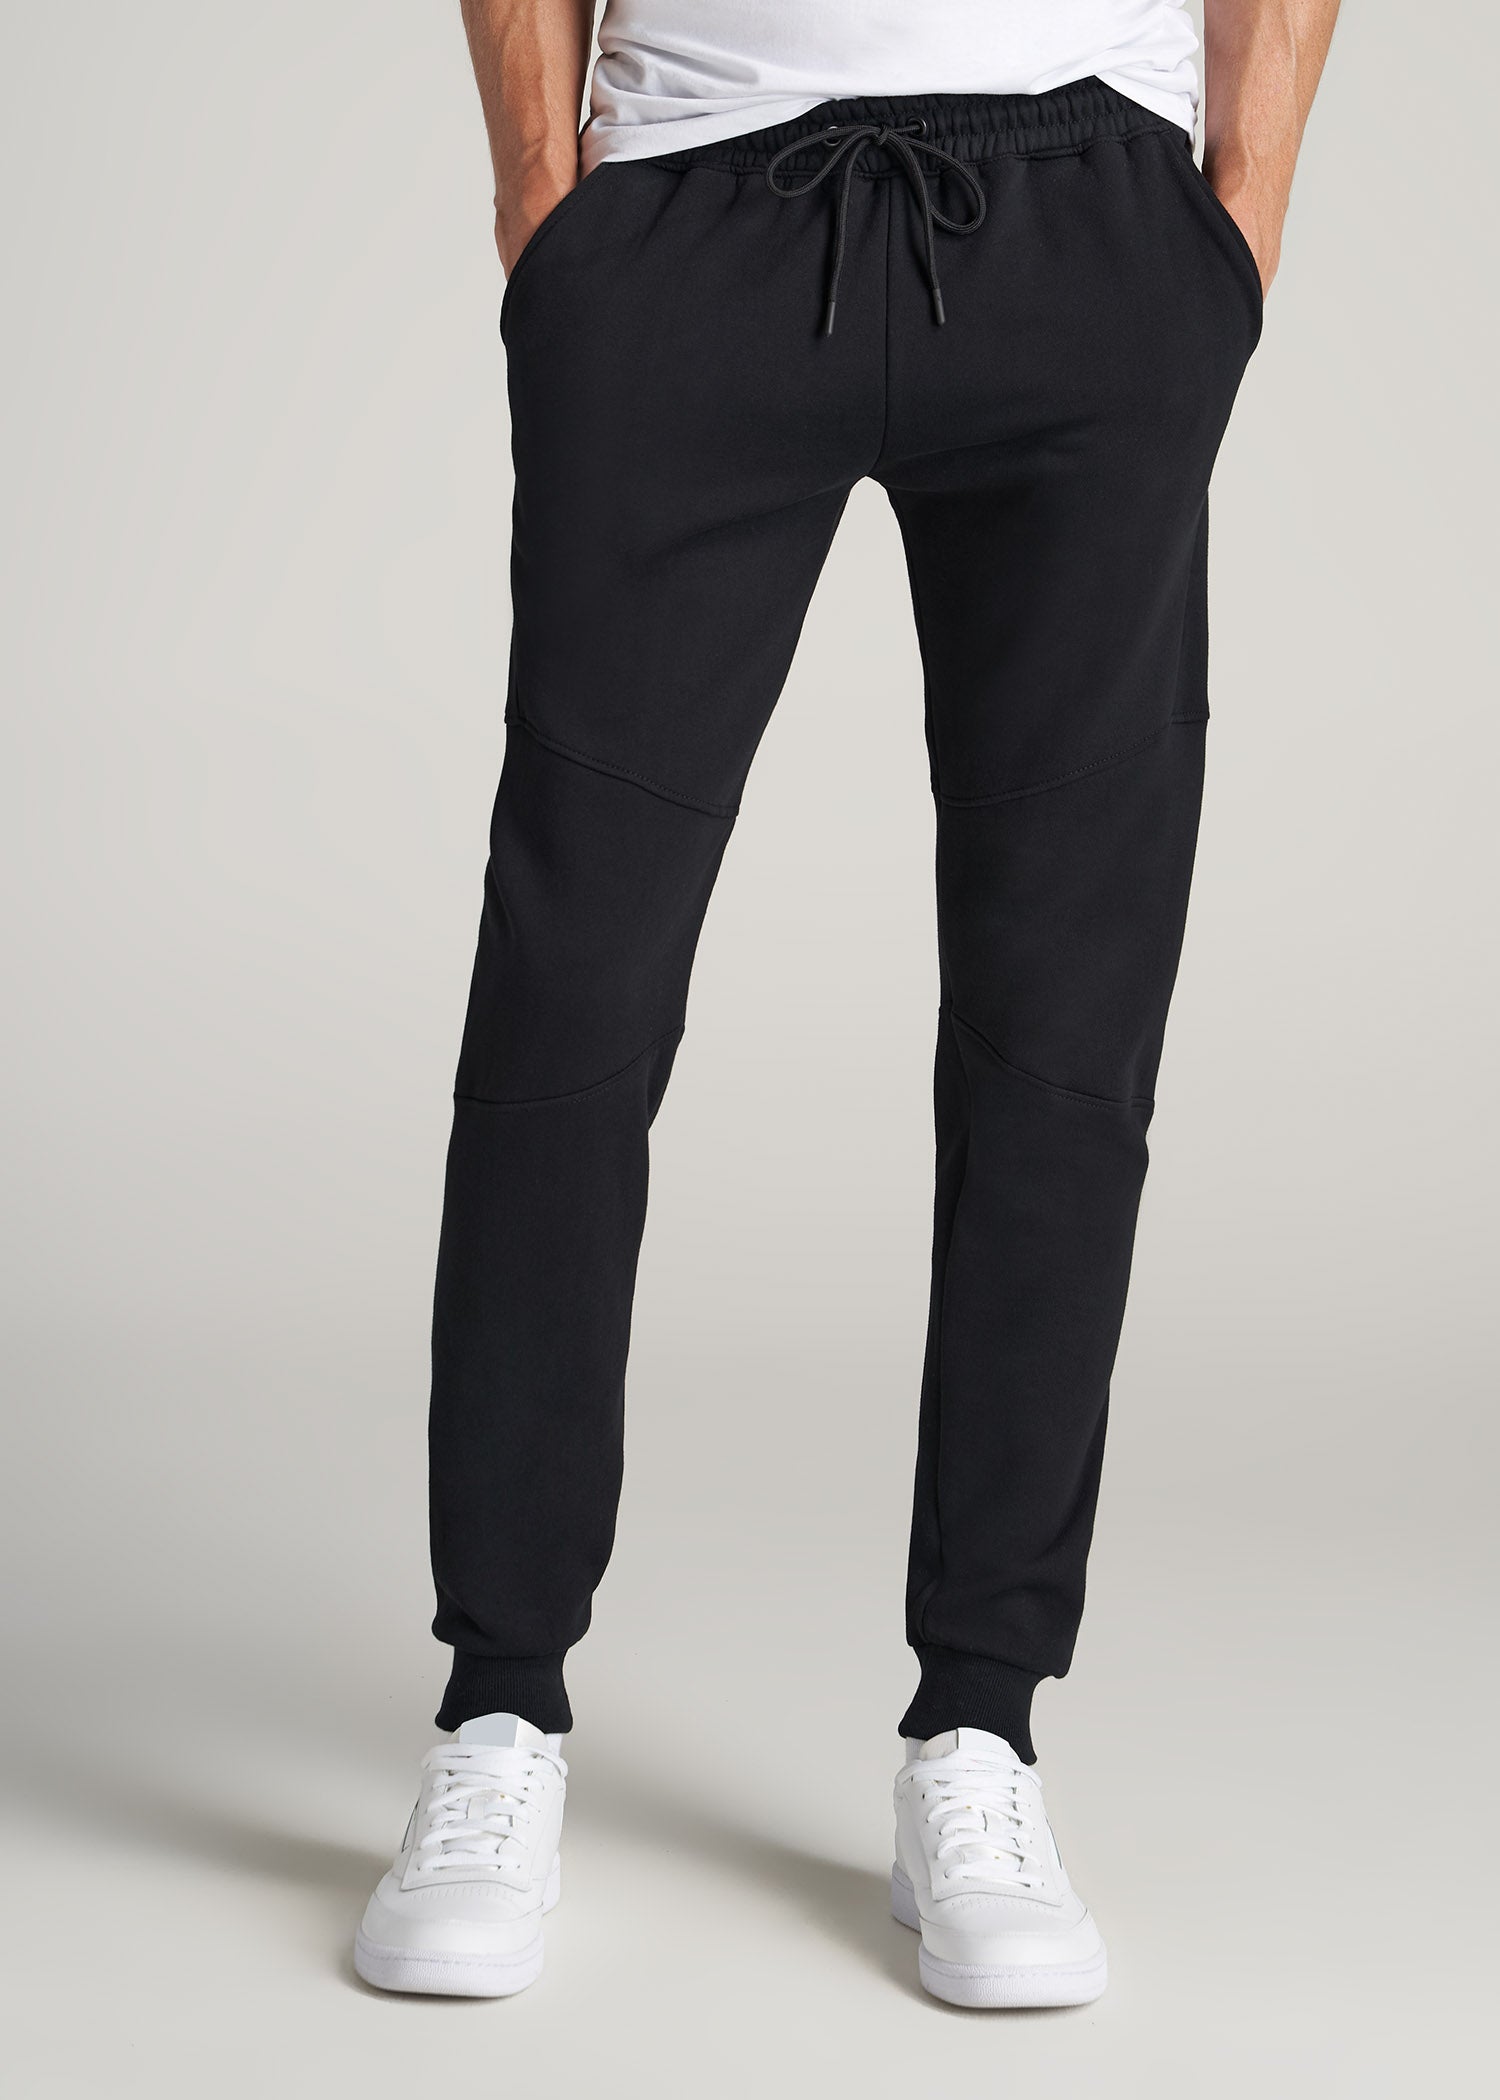 Men's Tall Performance French Terry Sweatpants Black